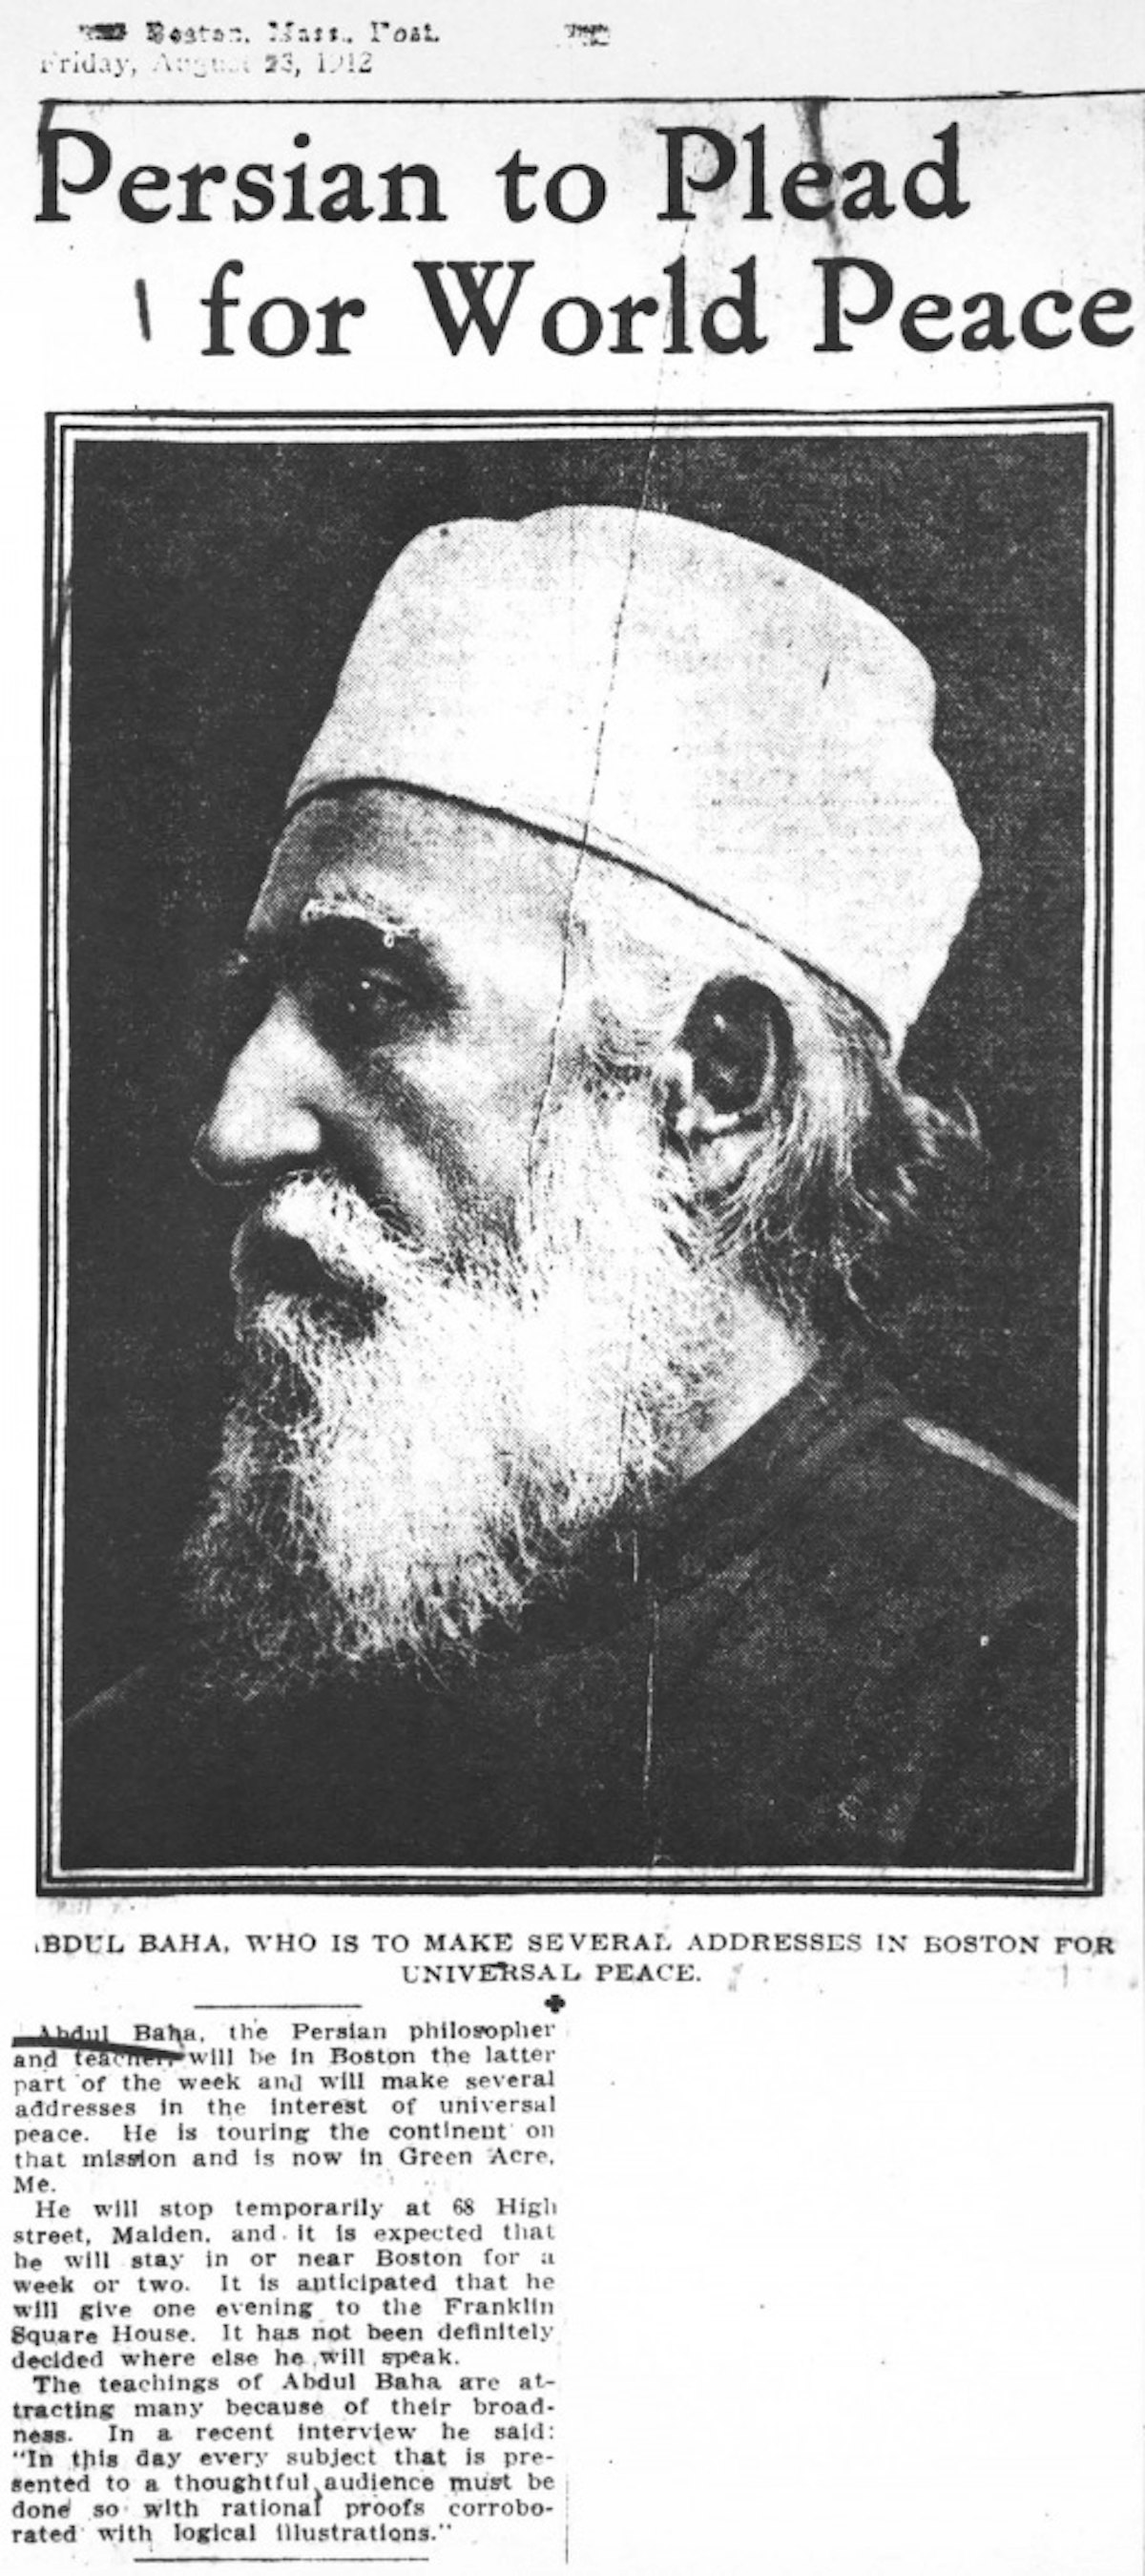 A short report published in The Boston Post on 23 August 1912 notes ‘Abdu’l-Baha’s plans to speak on the pressing issue of peace.